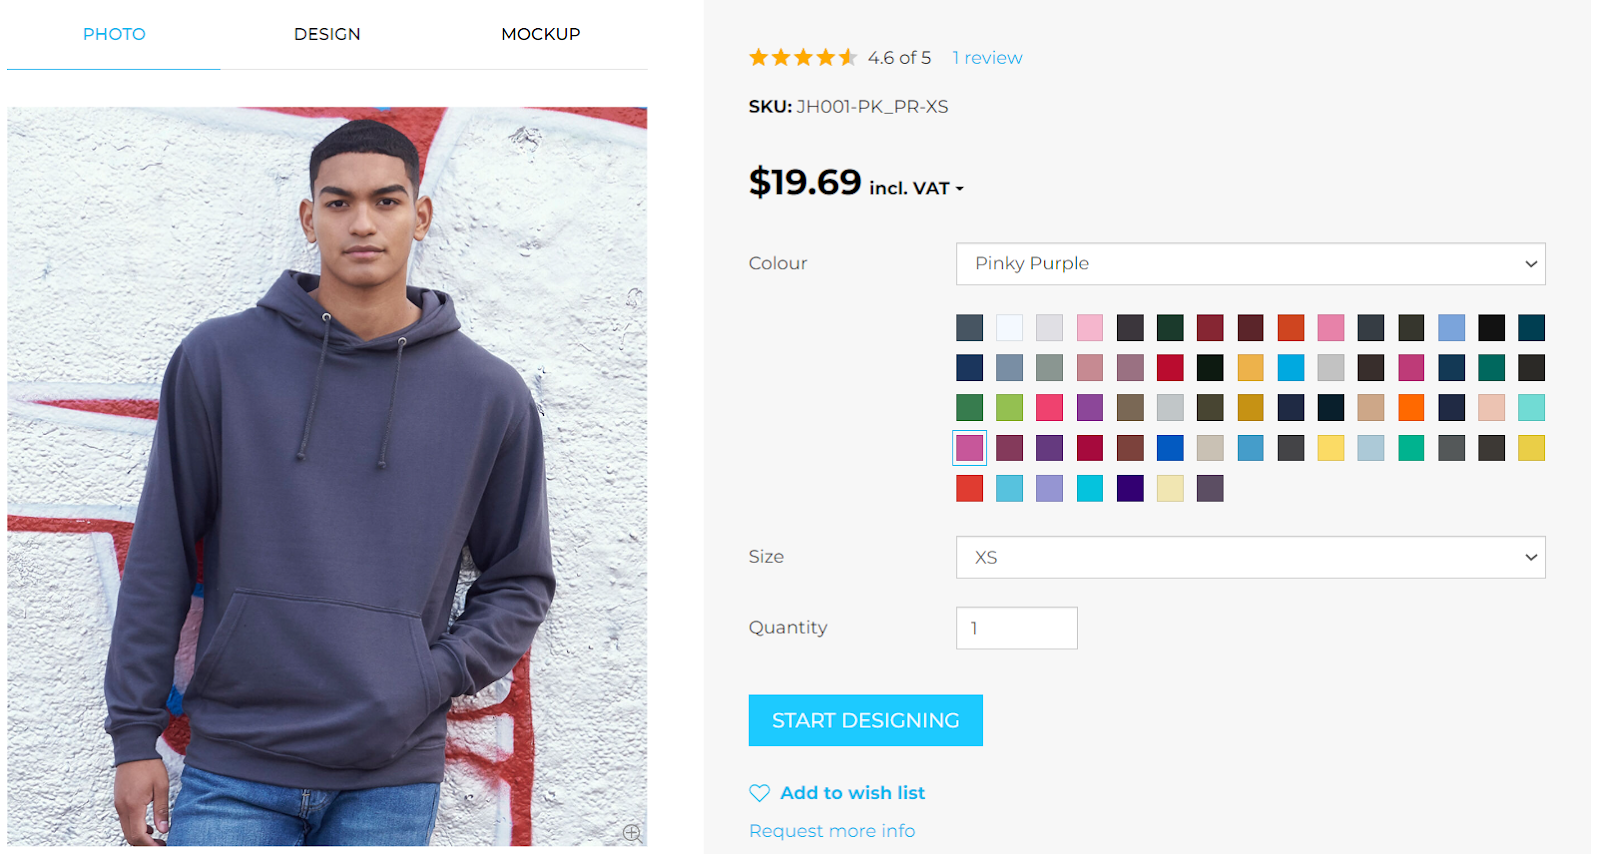 Imprinted's hoodies pricing and color options